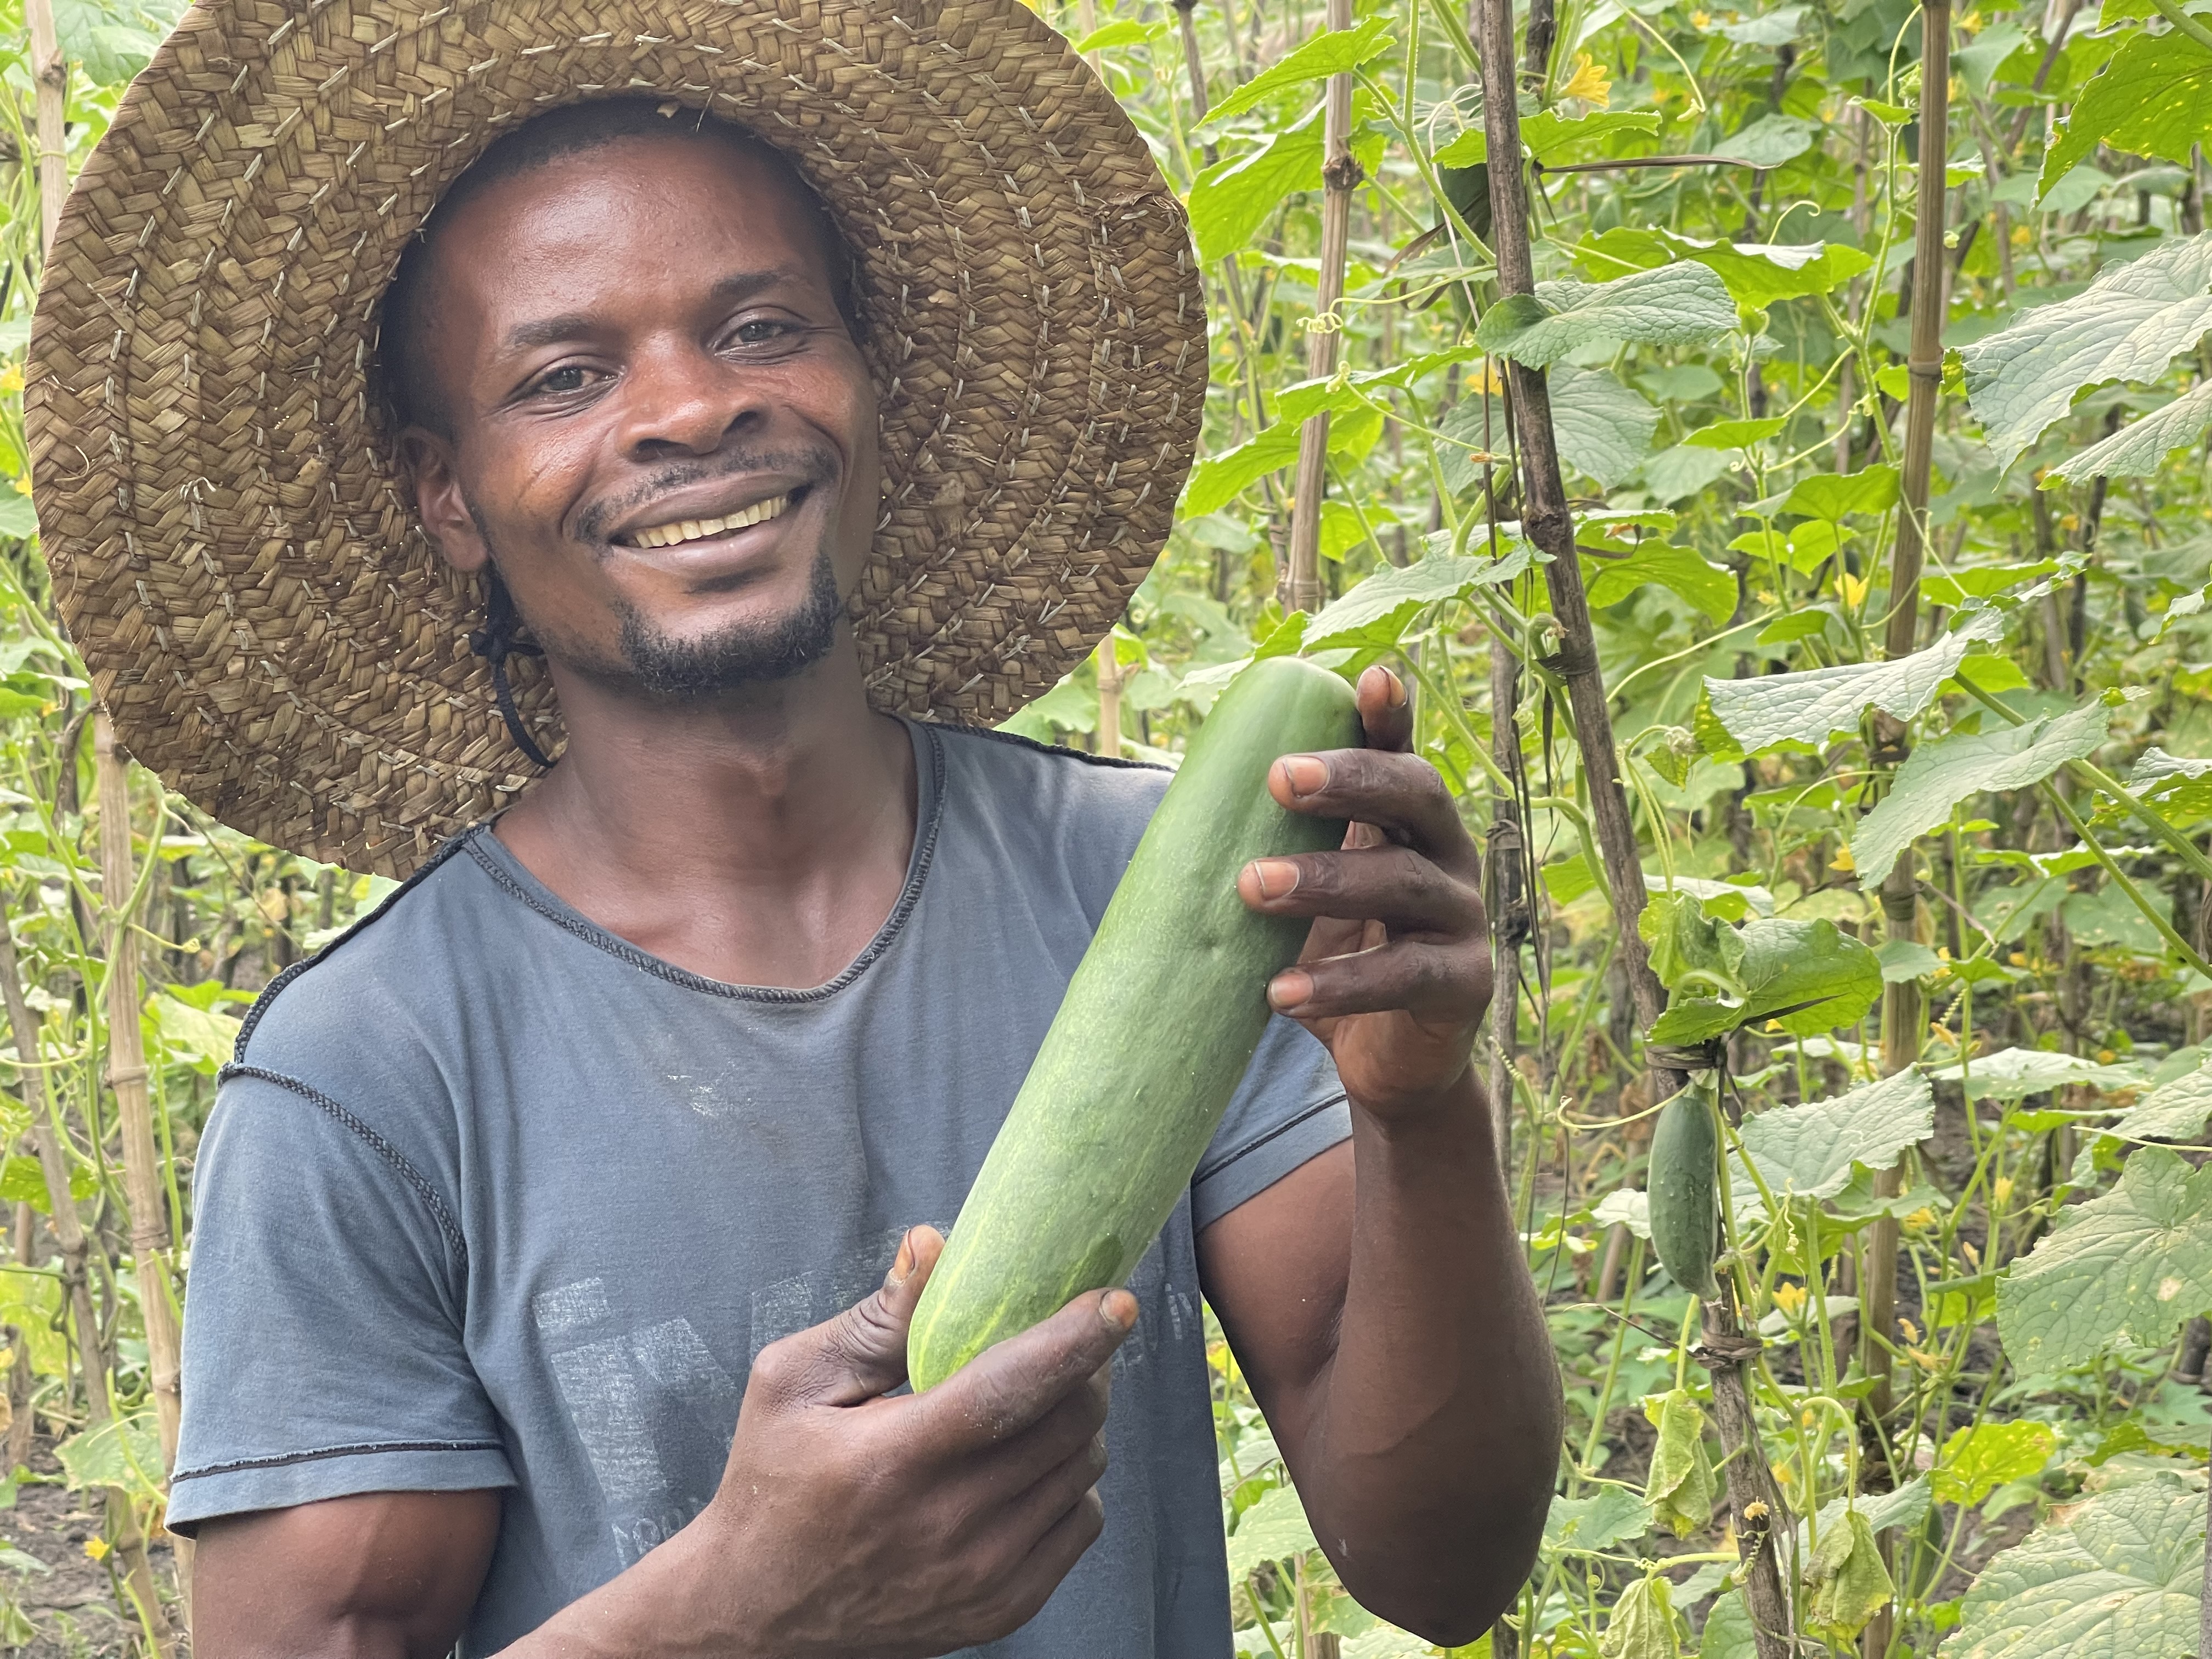 Adolph is one of the members of Kimbanseke community who benefited from the World Vision support in agricultural inputs and farming tools that allowed him to do market gardening 